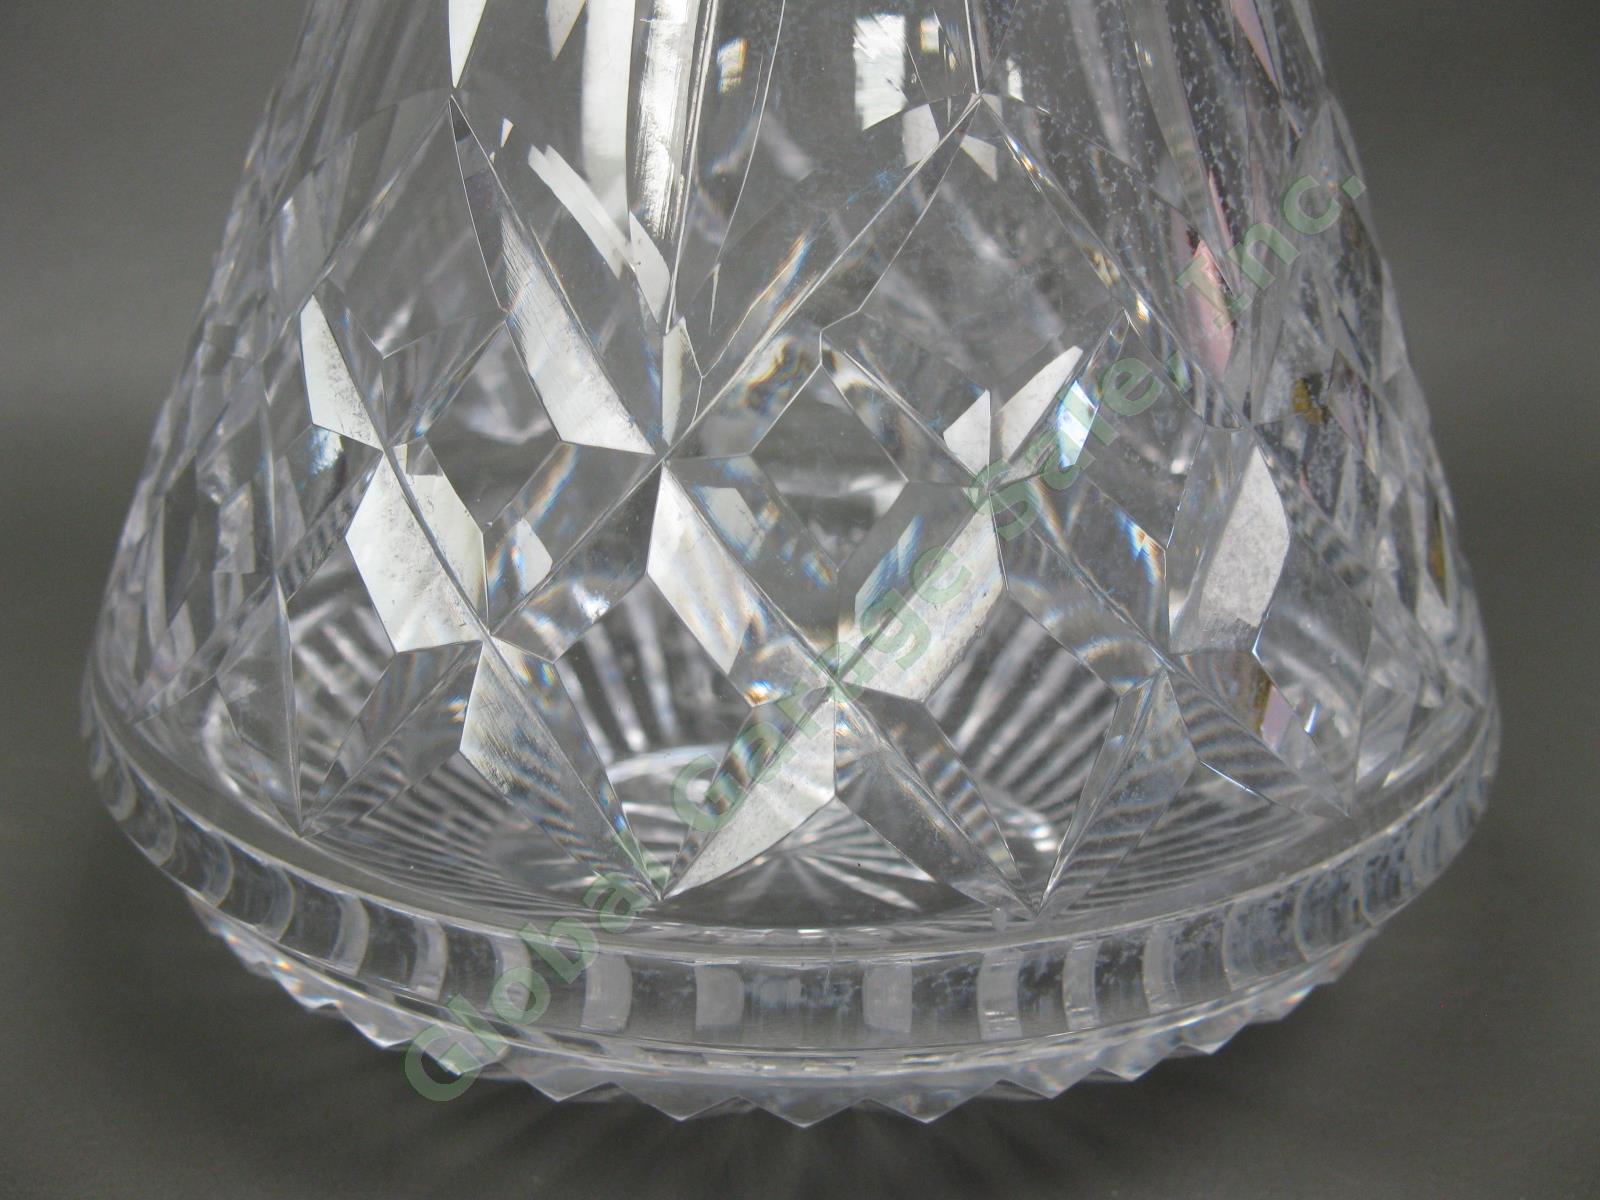 Vintage Waterford Crystal Lismore Roly Poly Old Fashioned Glass Liquor Decanter 4